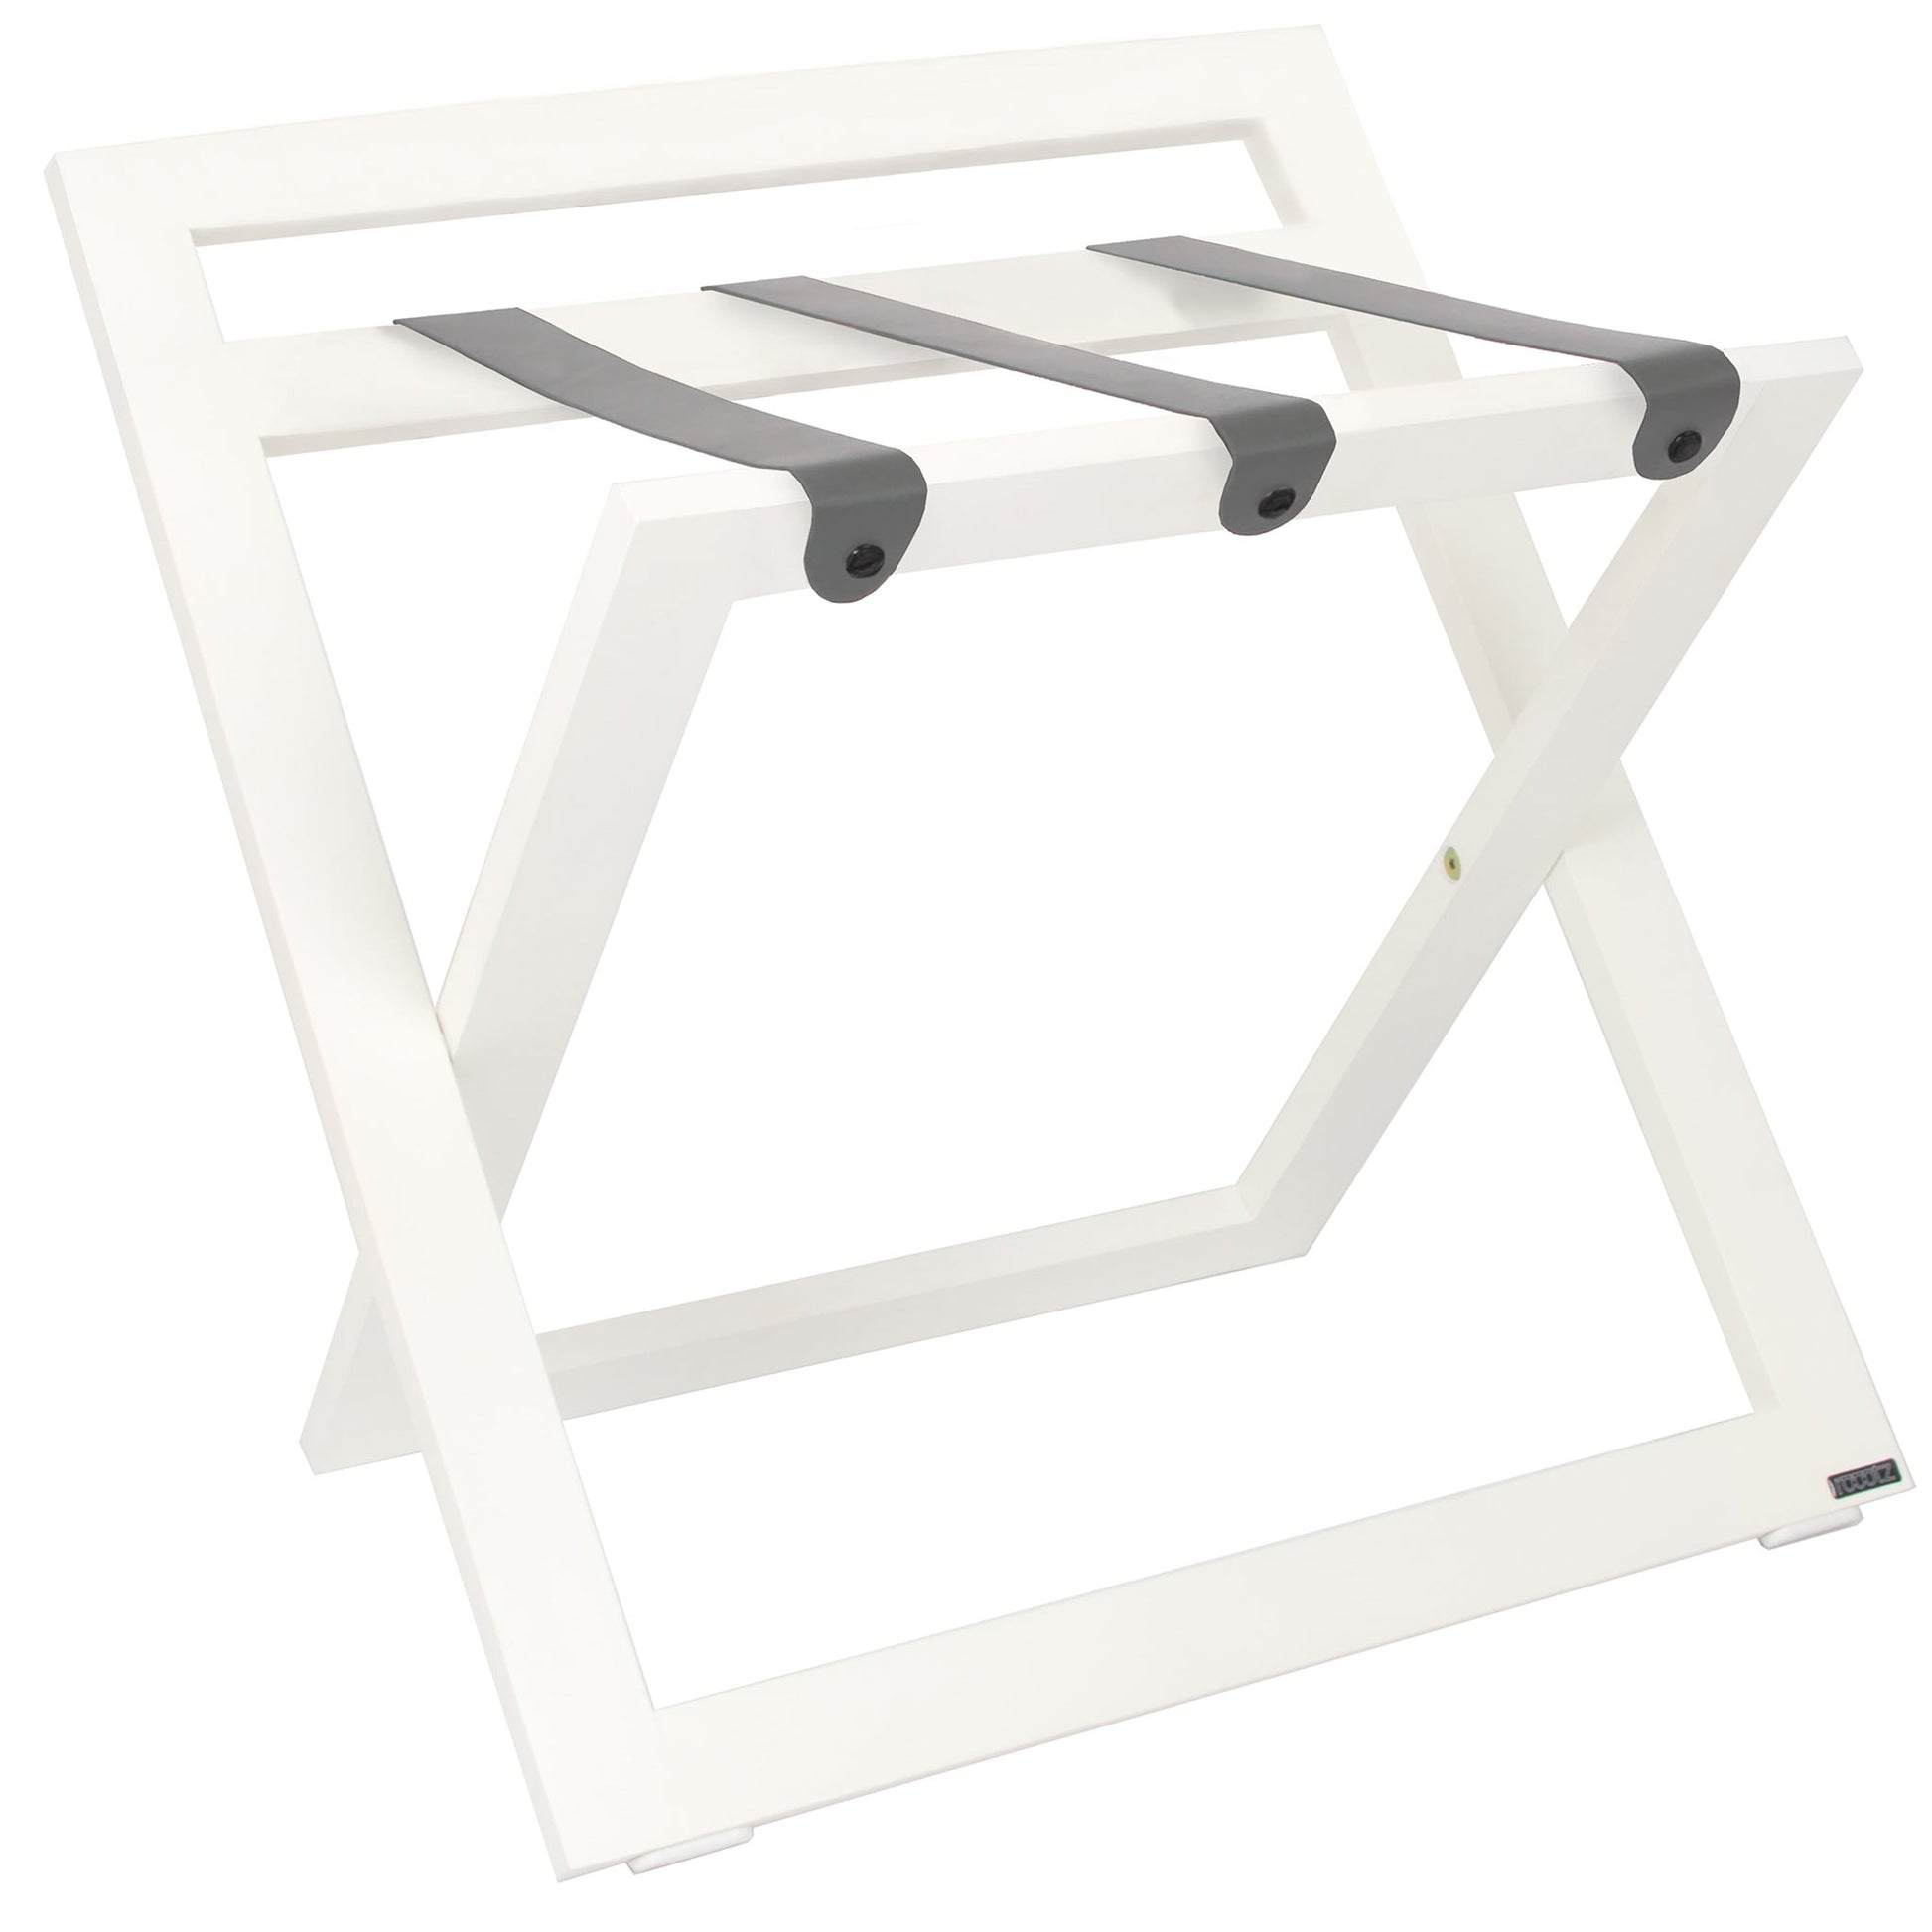 Roootz compact white wooden hotel luggage rack with grey leather straps and backstand